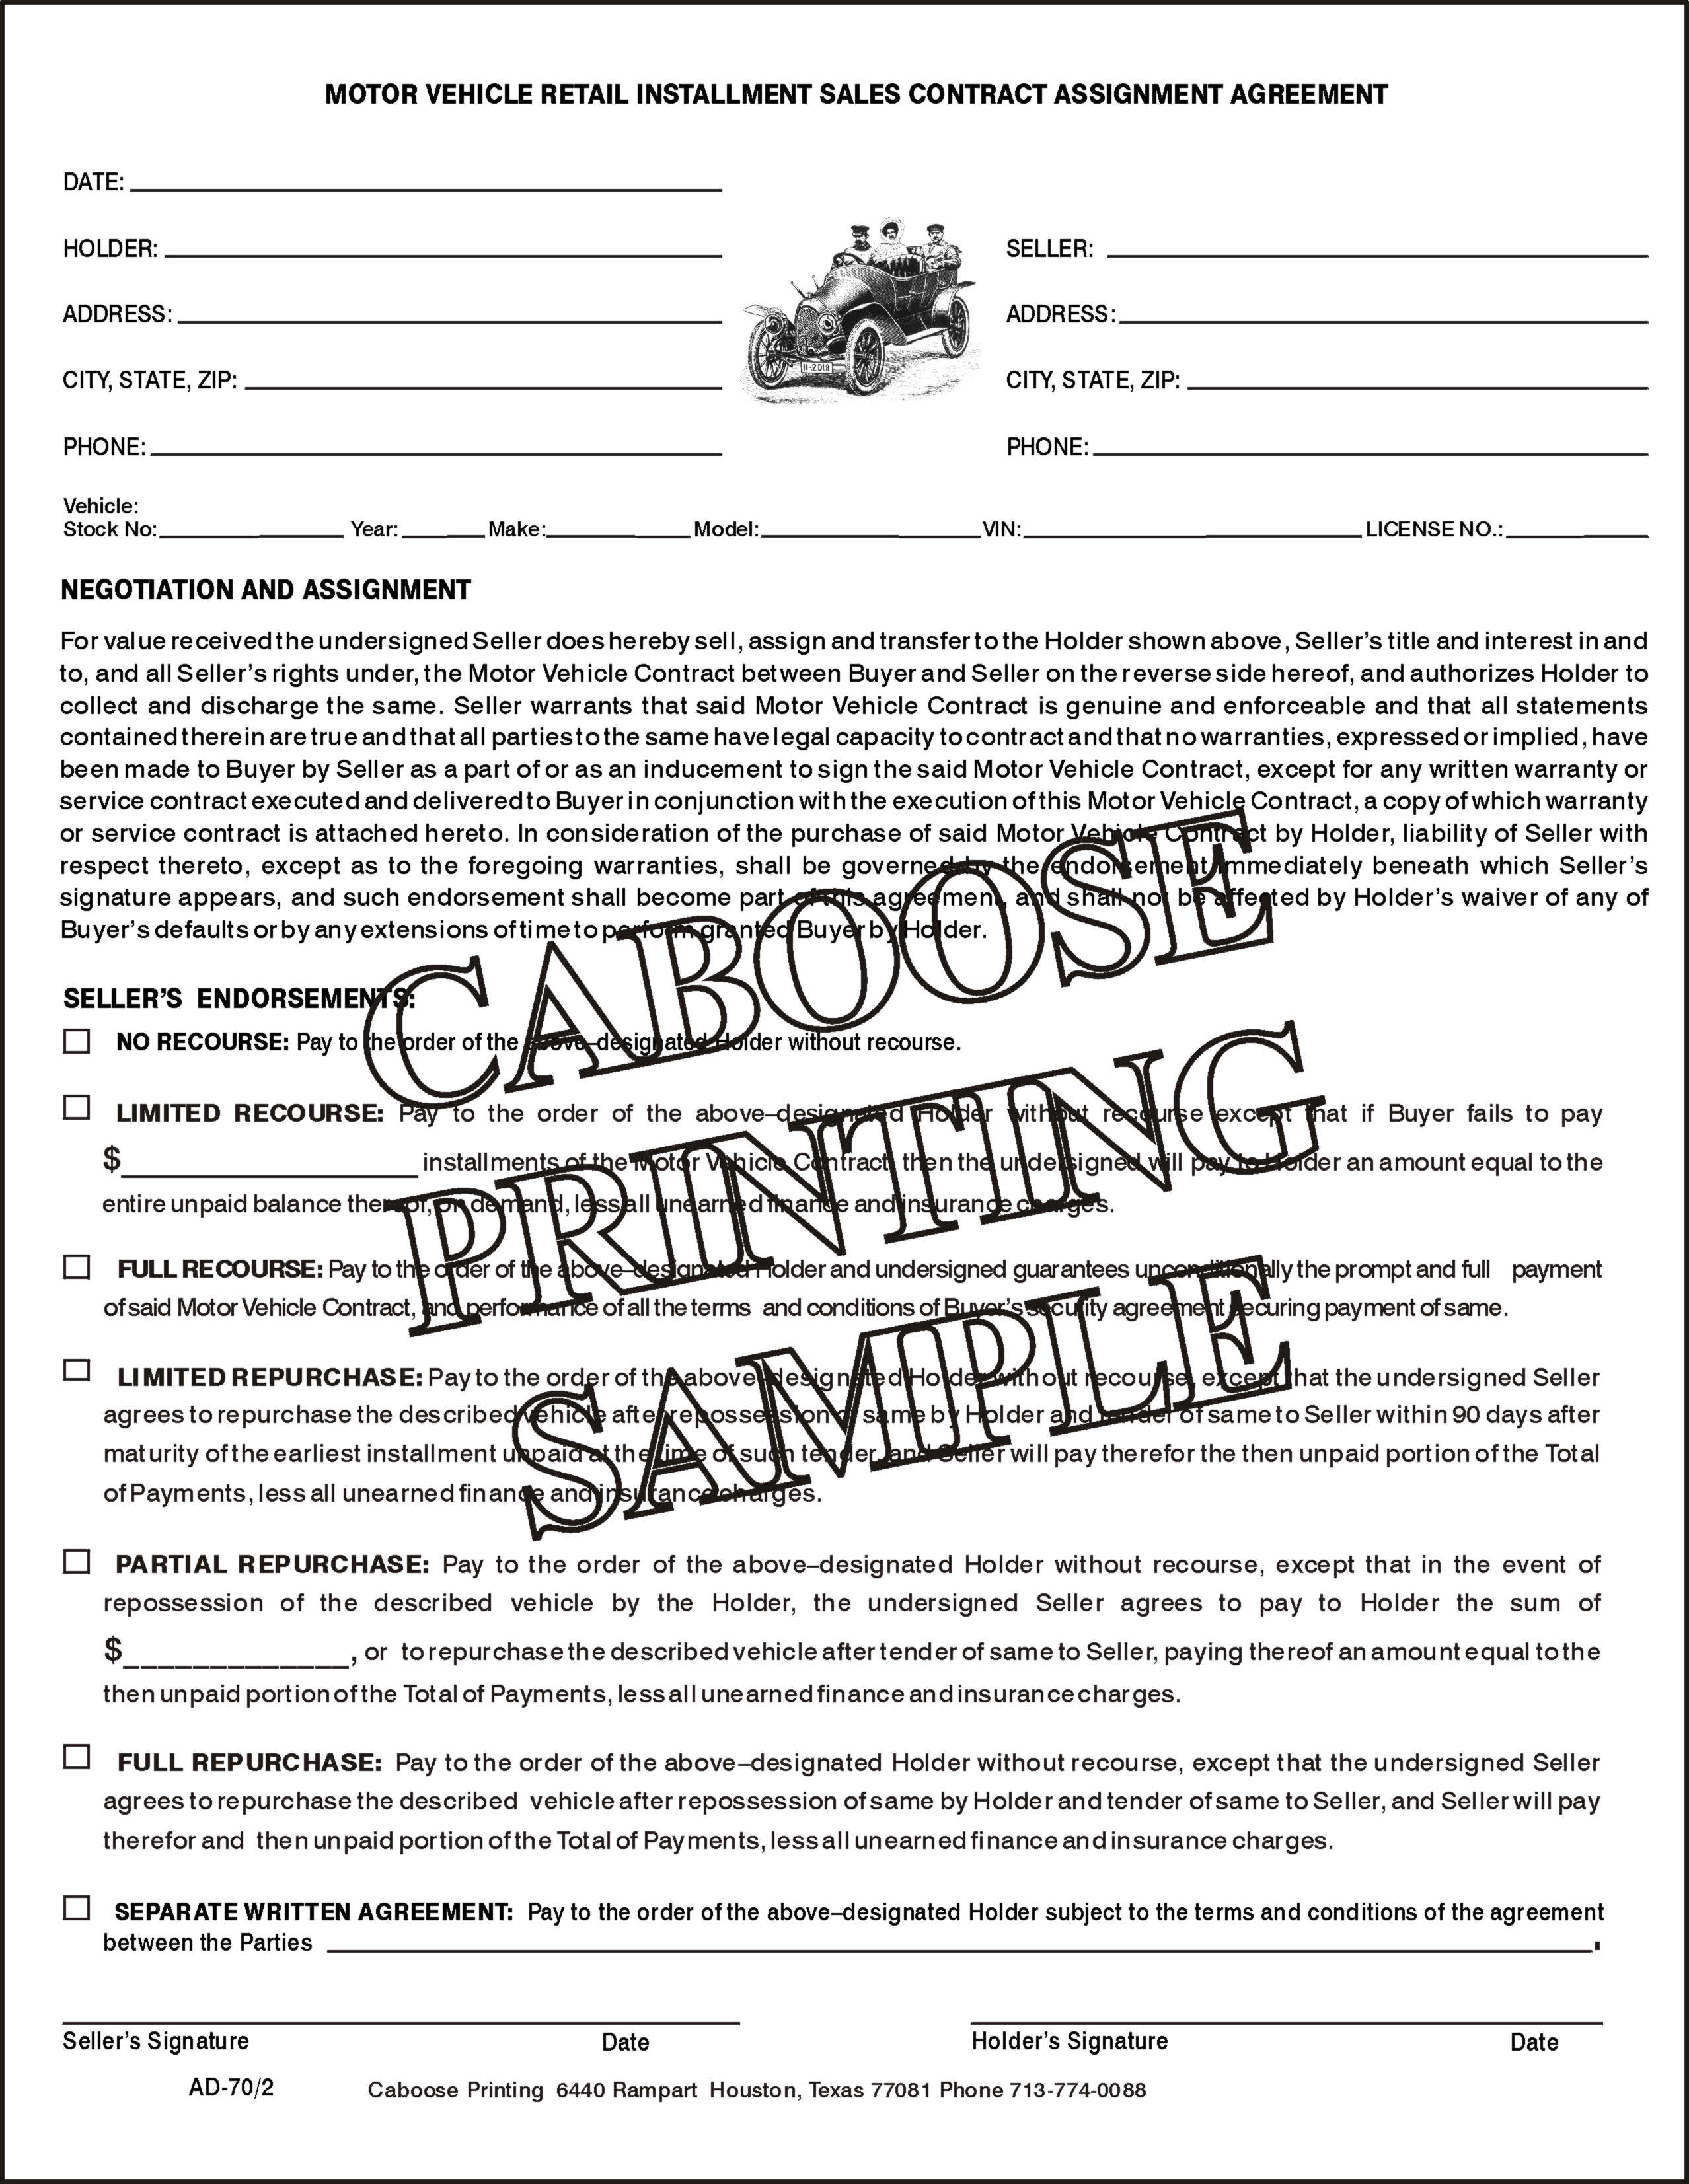 Motor Vehicle Retail Installment Sales Contract Assignment Agreement Ad70 2 Package Of 100 Caboose Printing